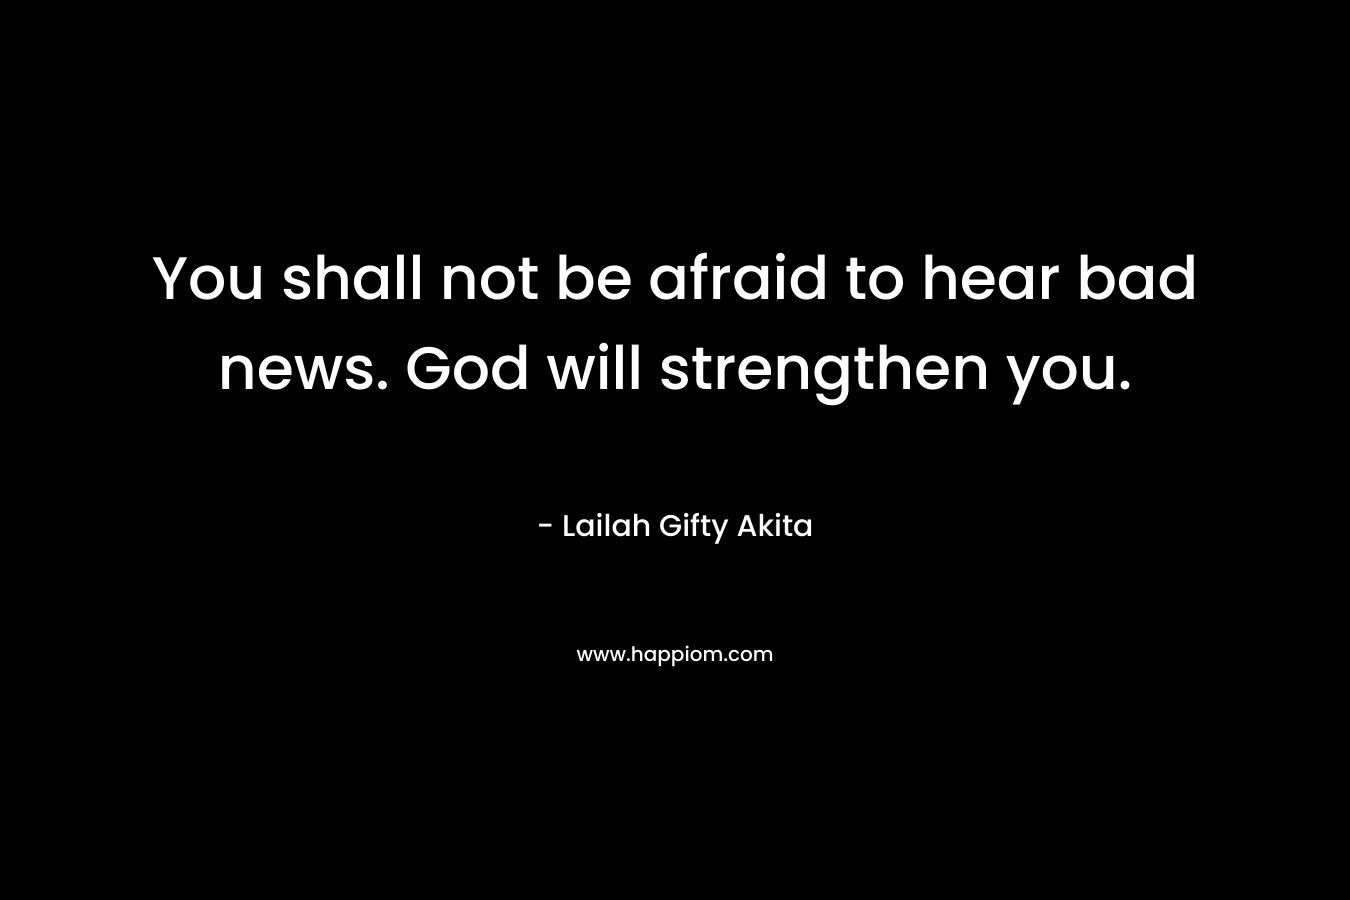 You shall not be afraid to hear bad news. God will strengthen you.